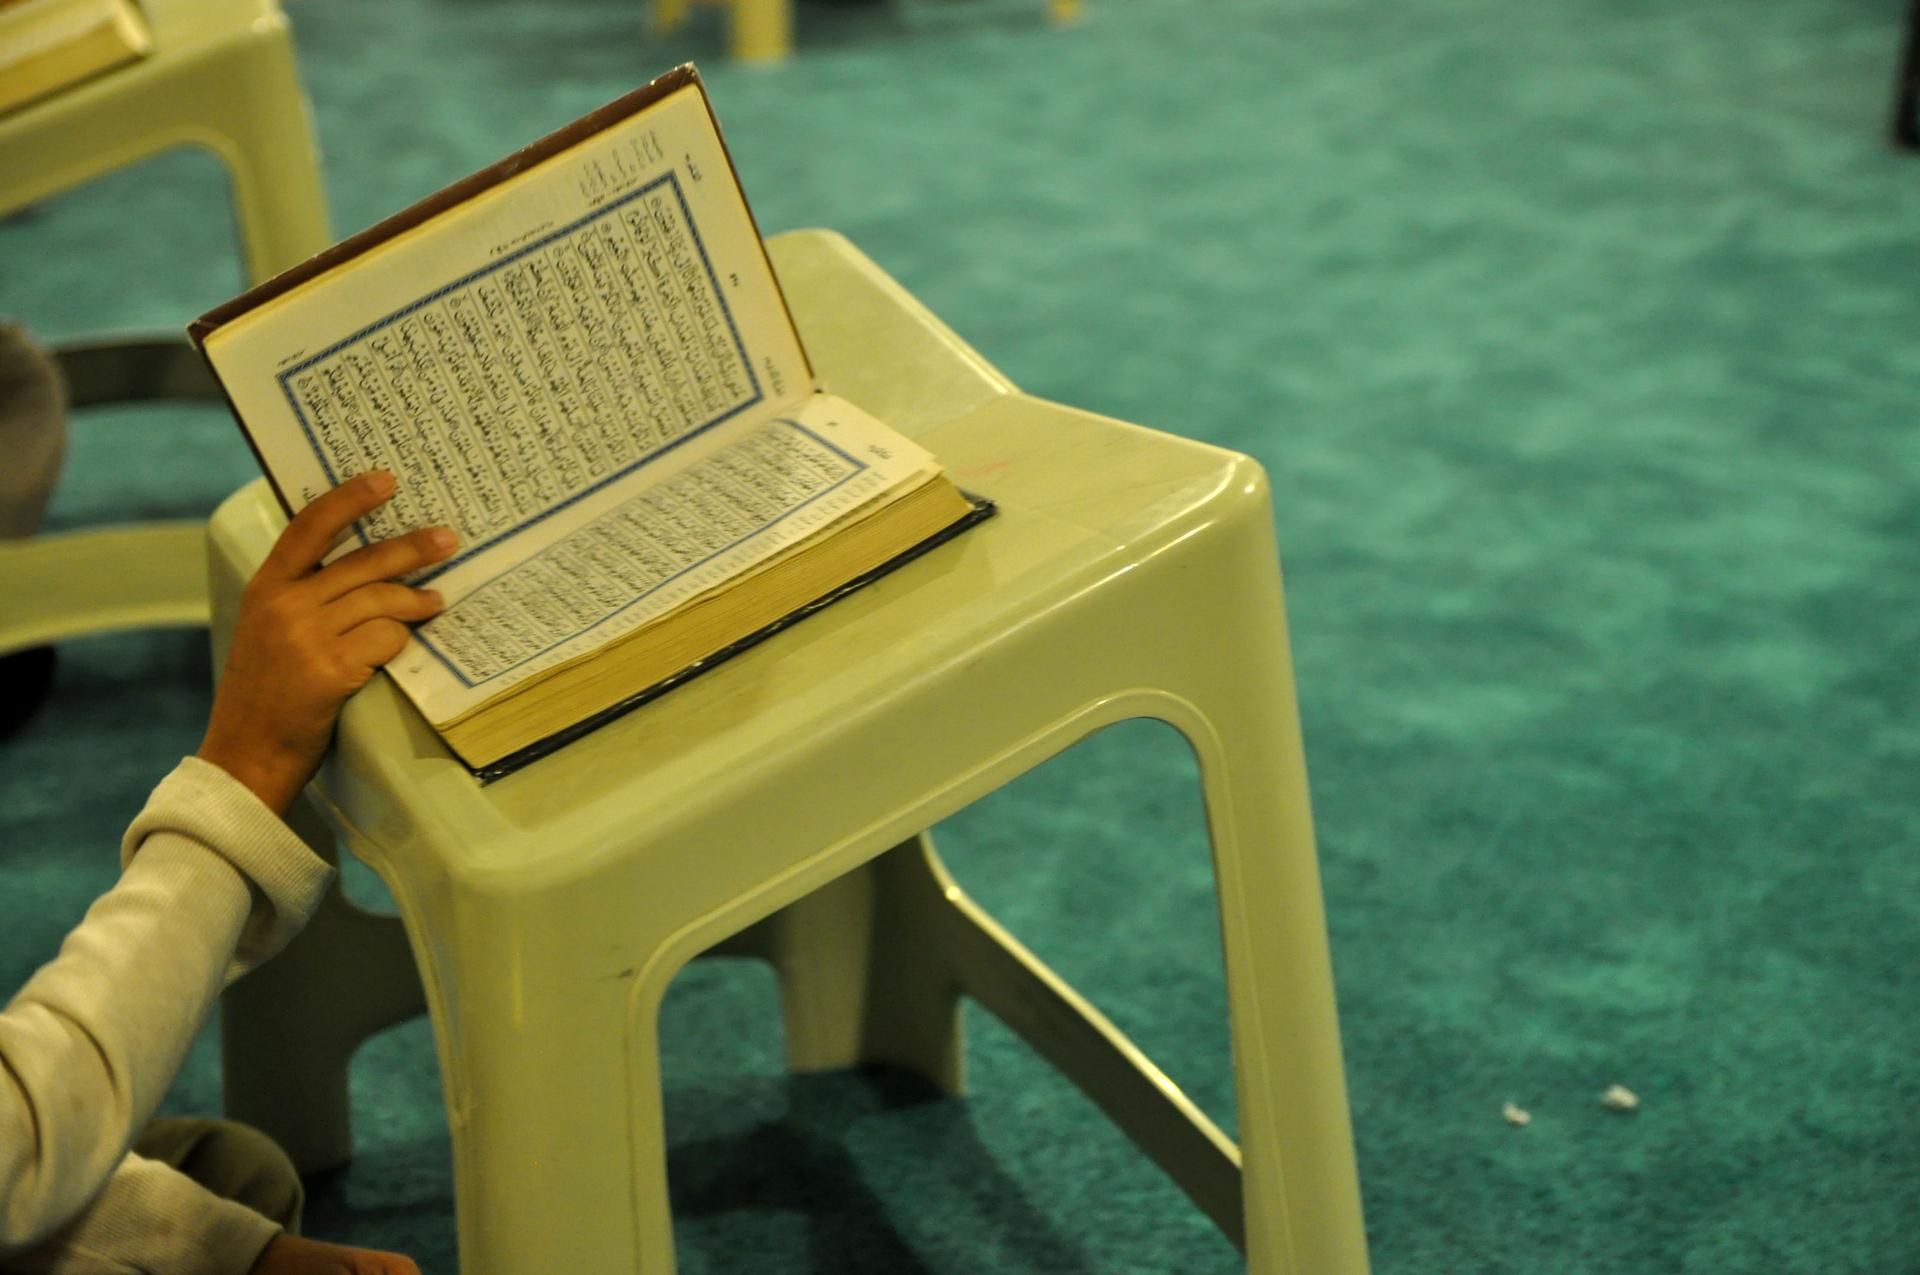 A hand holds the Quran open on a stool near green carpet